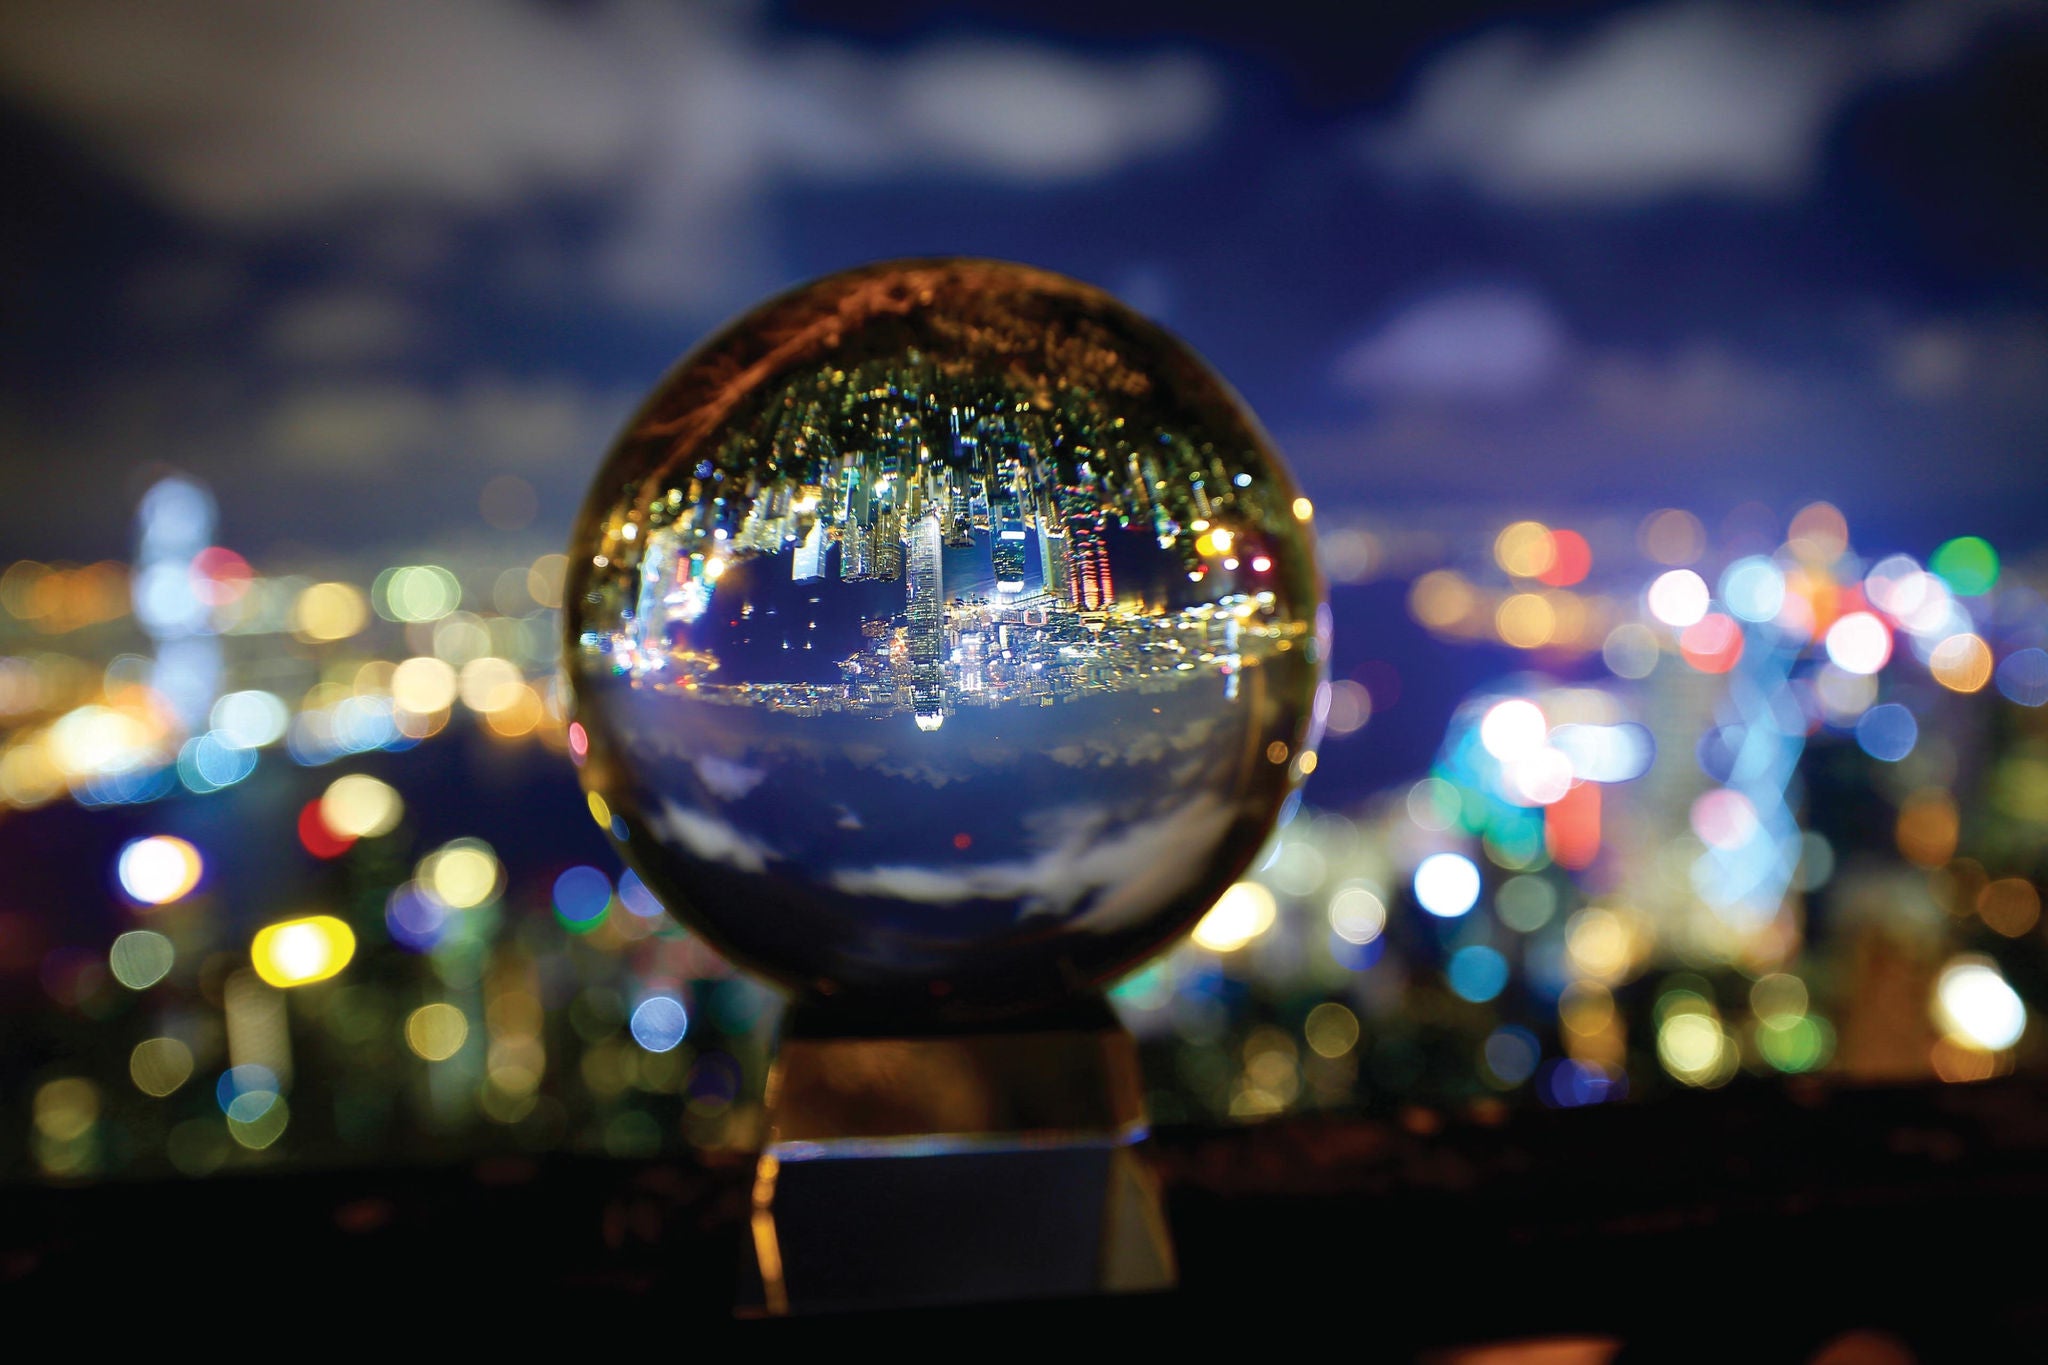 Reflection of a cityscape at night seen in a glass ball